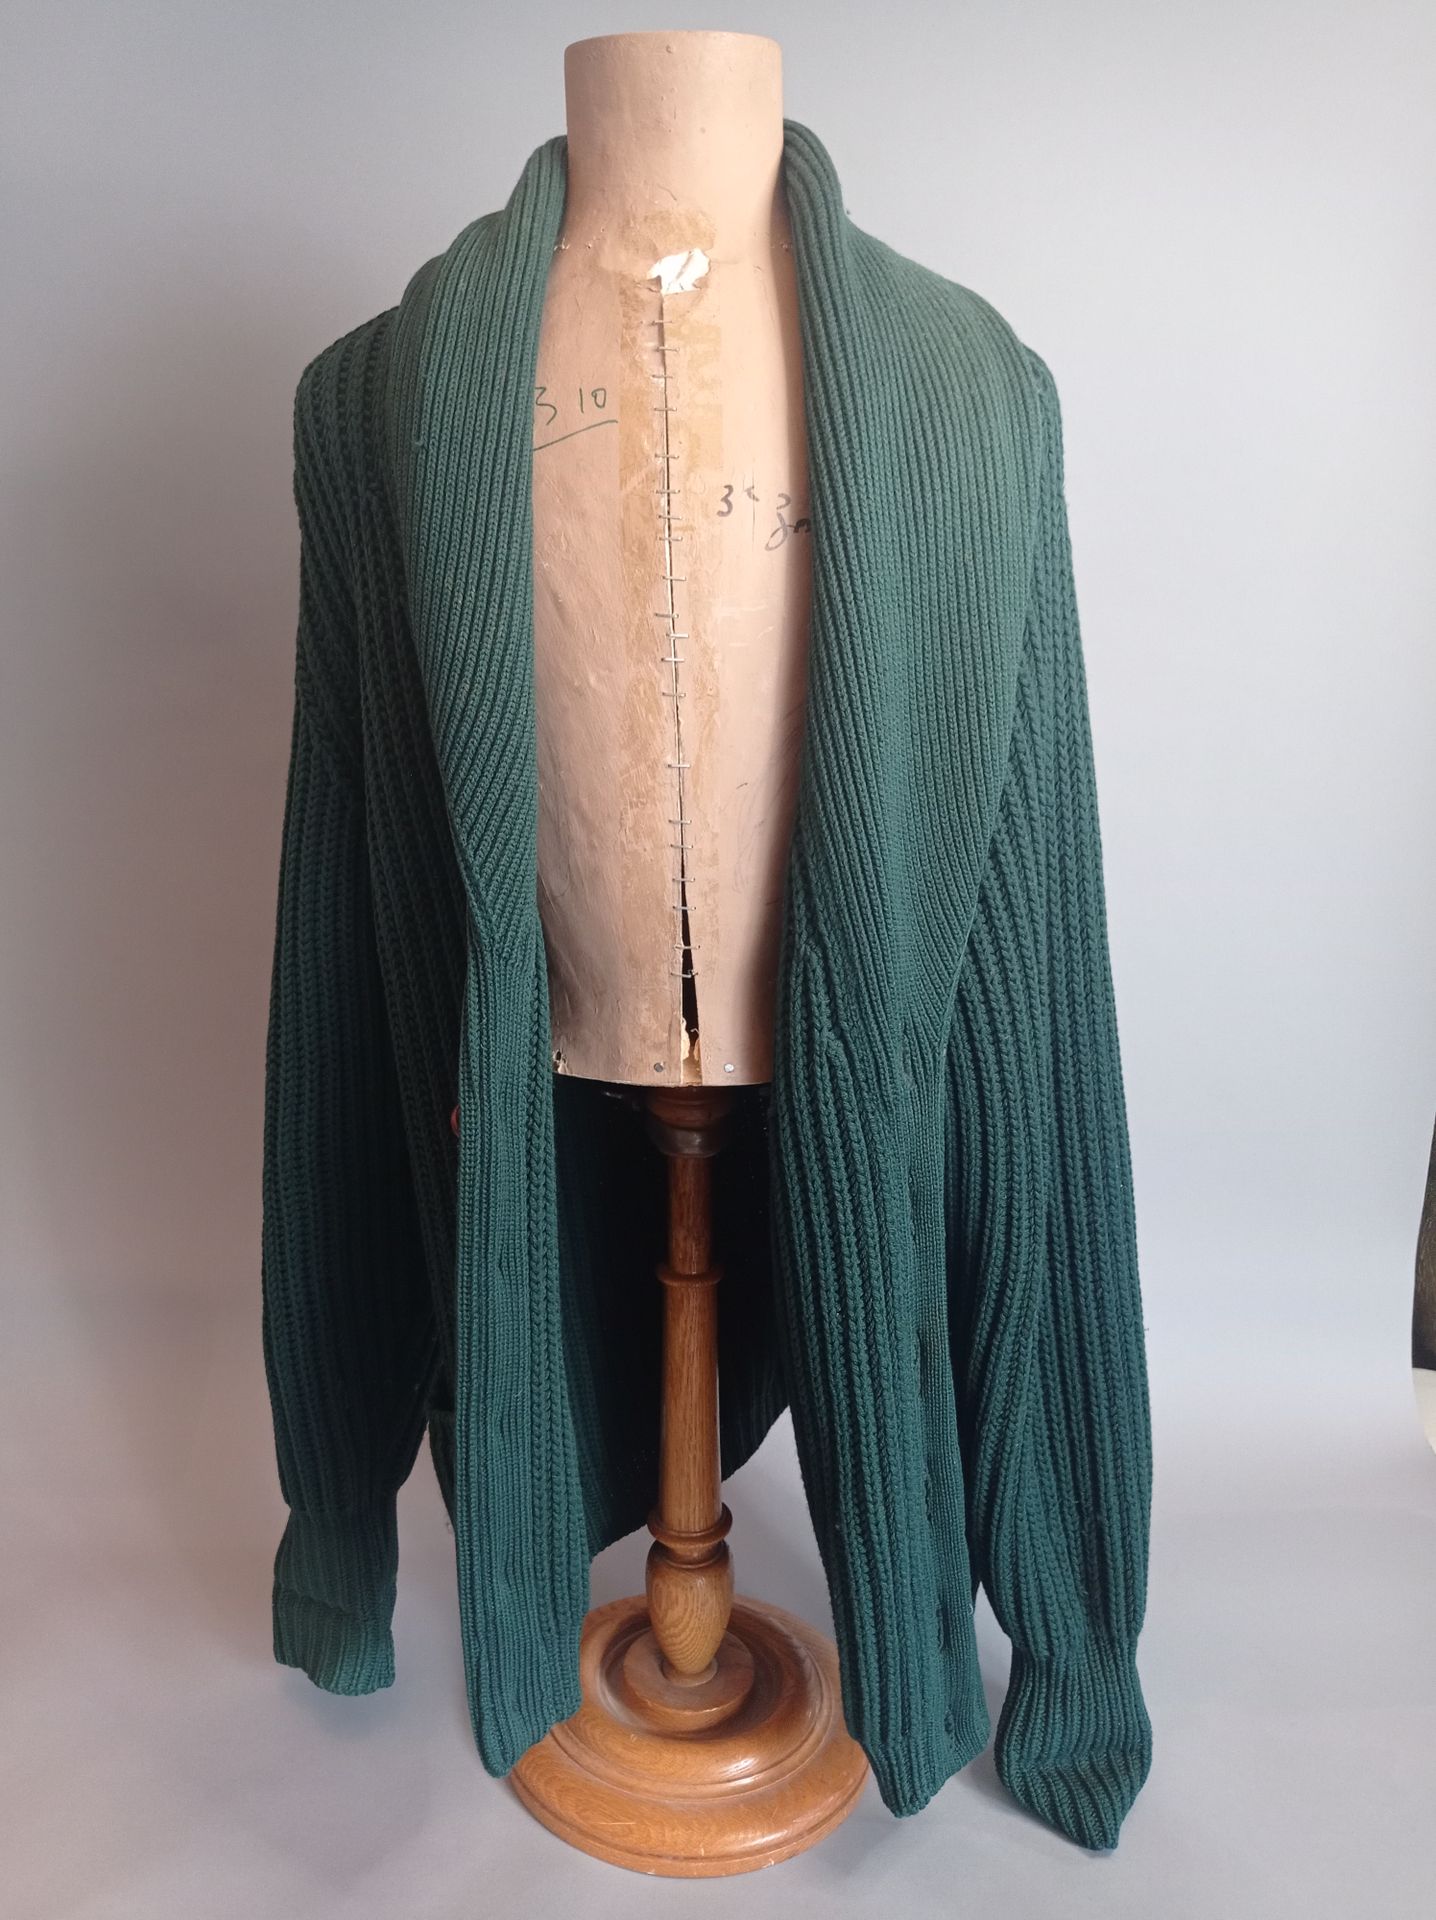 Christian DIOR Boutique Mister
Forest green knitted cardigan